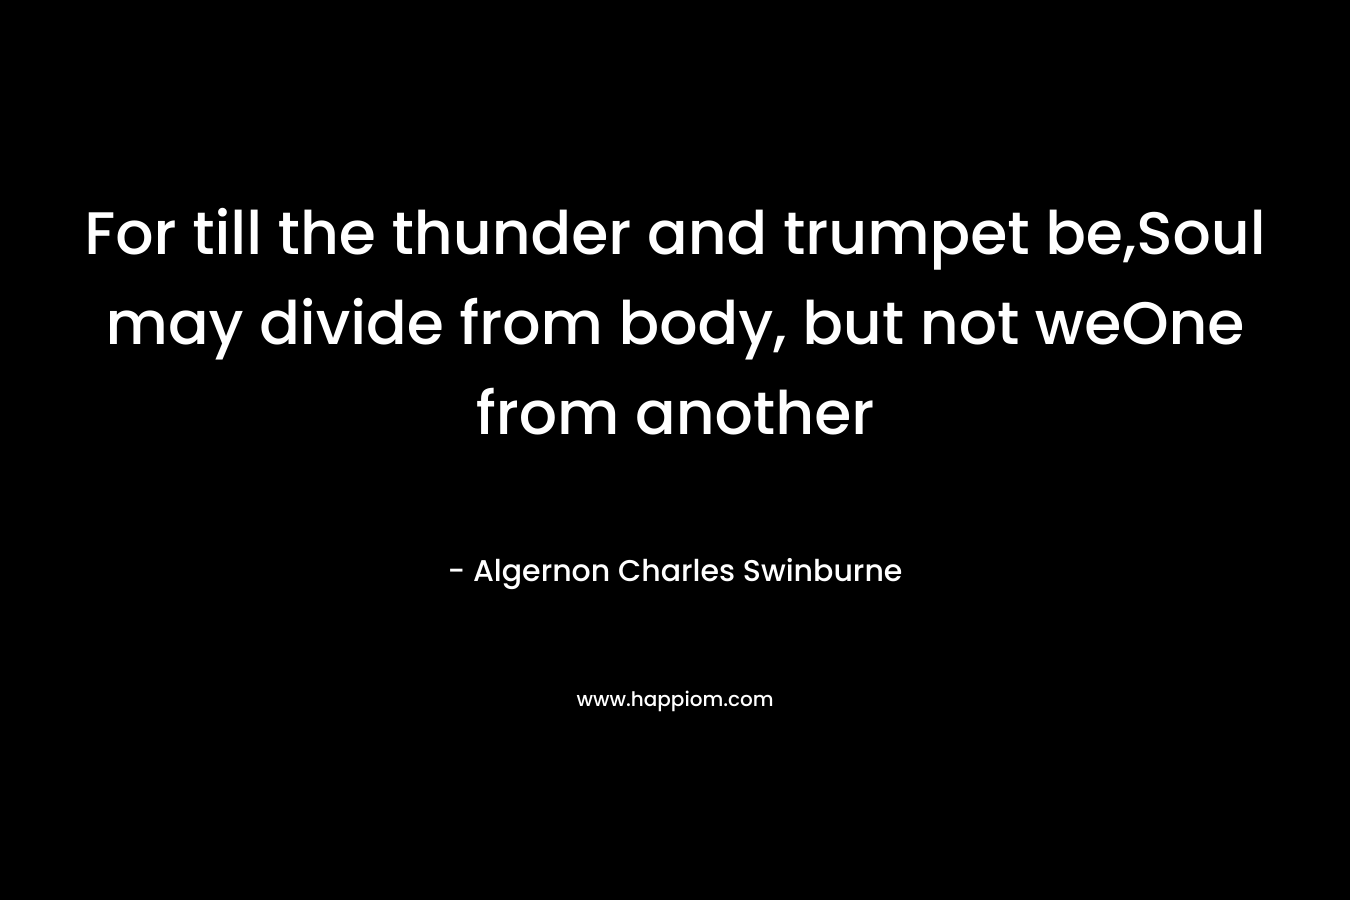 For till the thunder and trumpet be,Soul may divide from body, but not weOne from another – Algernon Charles Swinburne